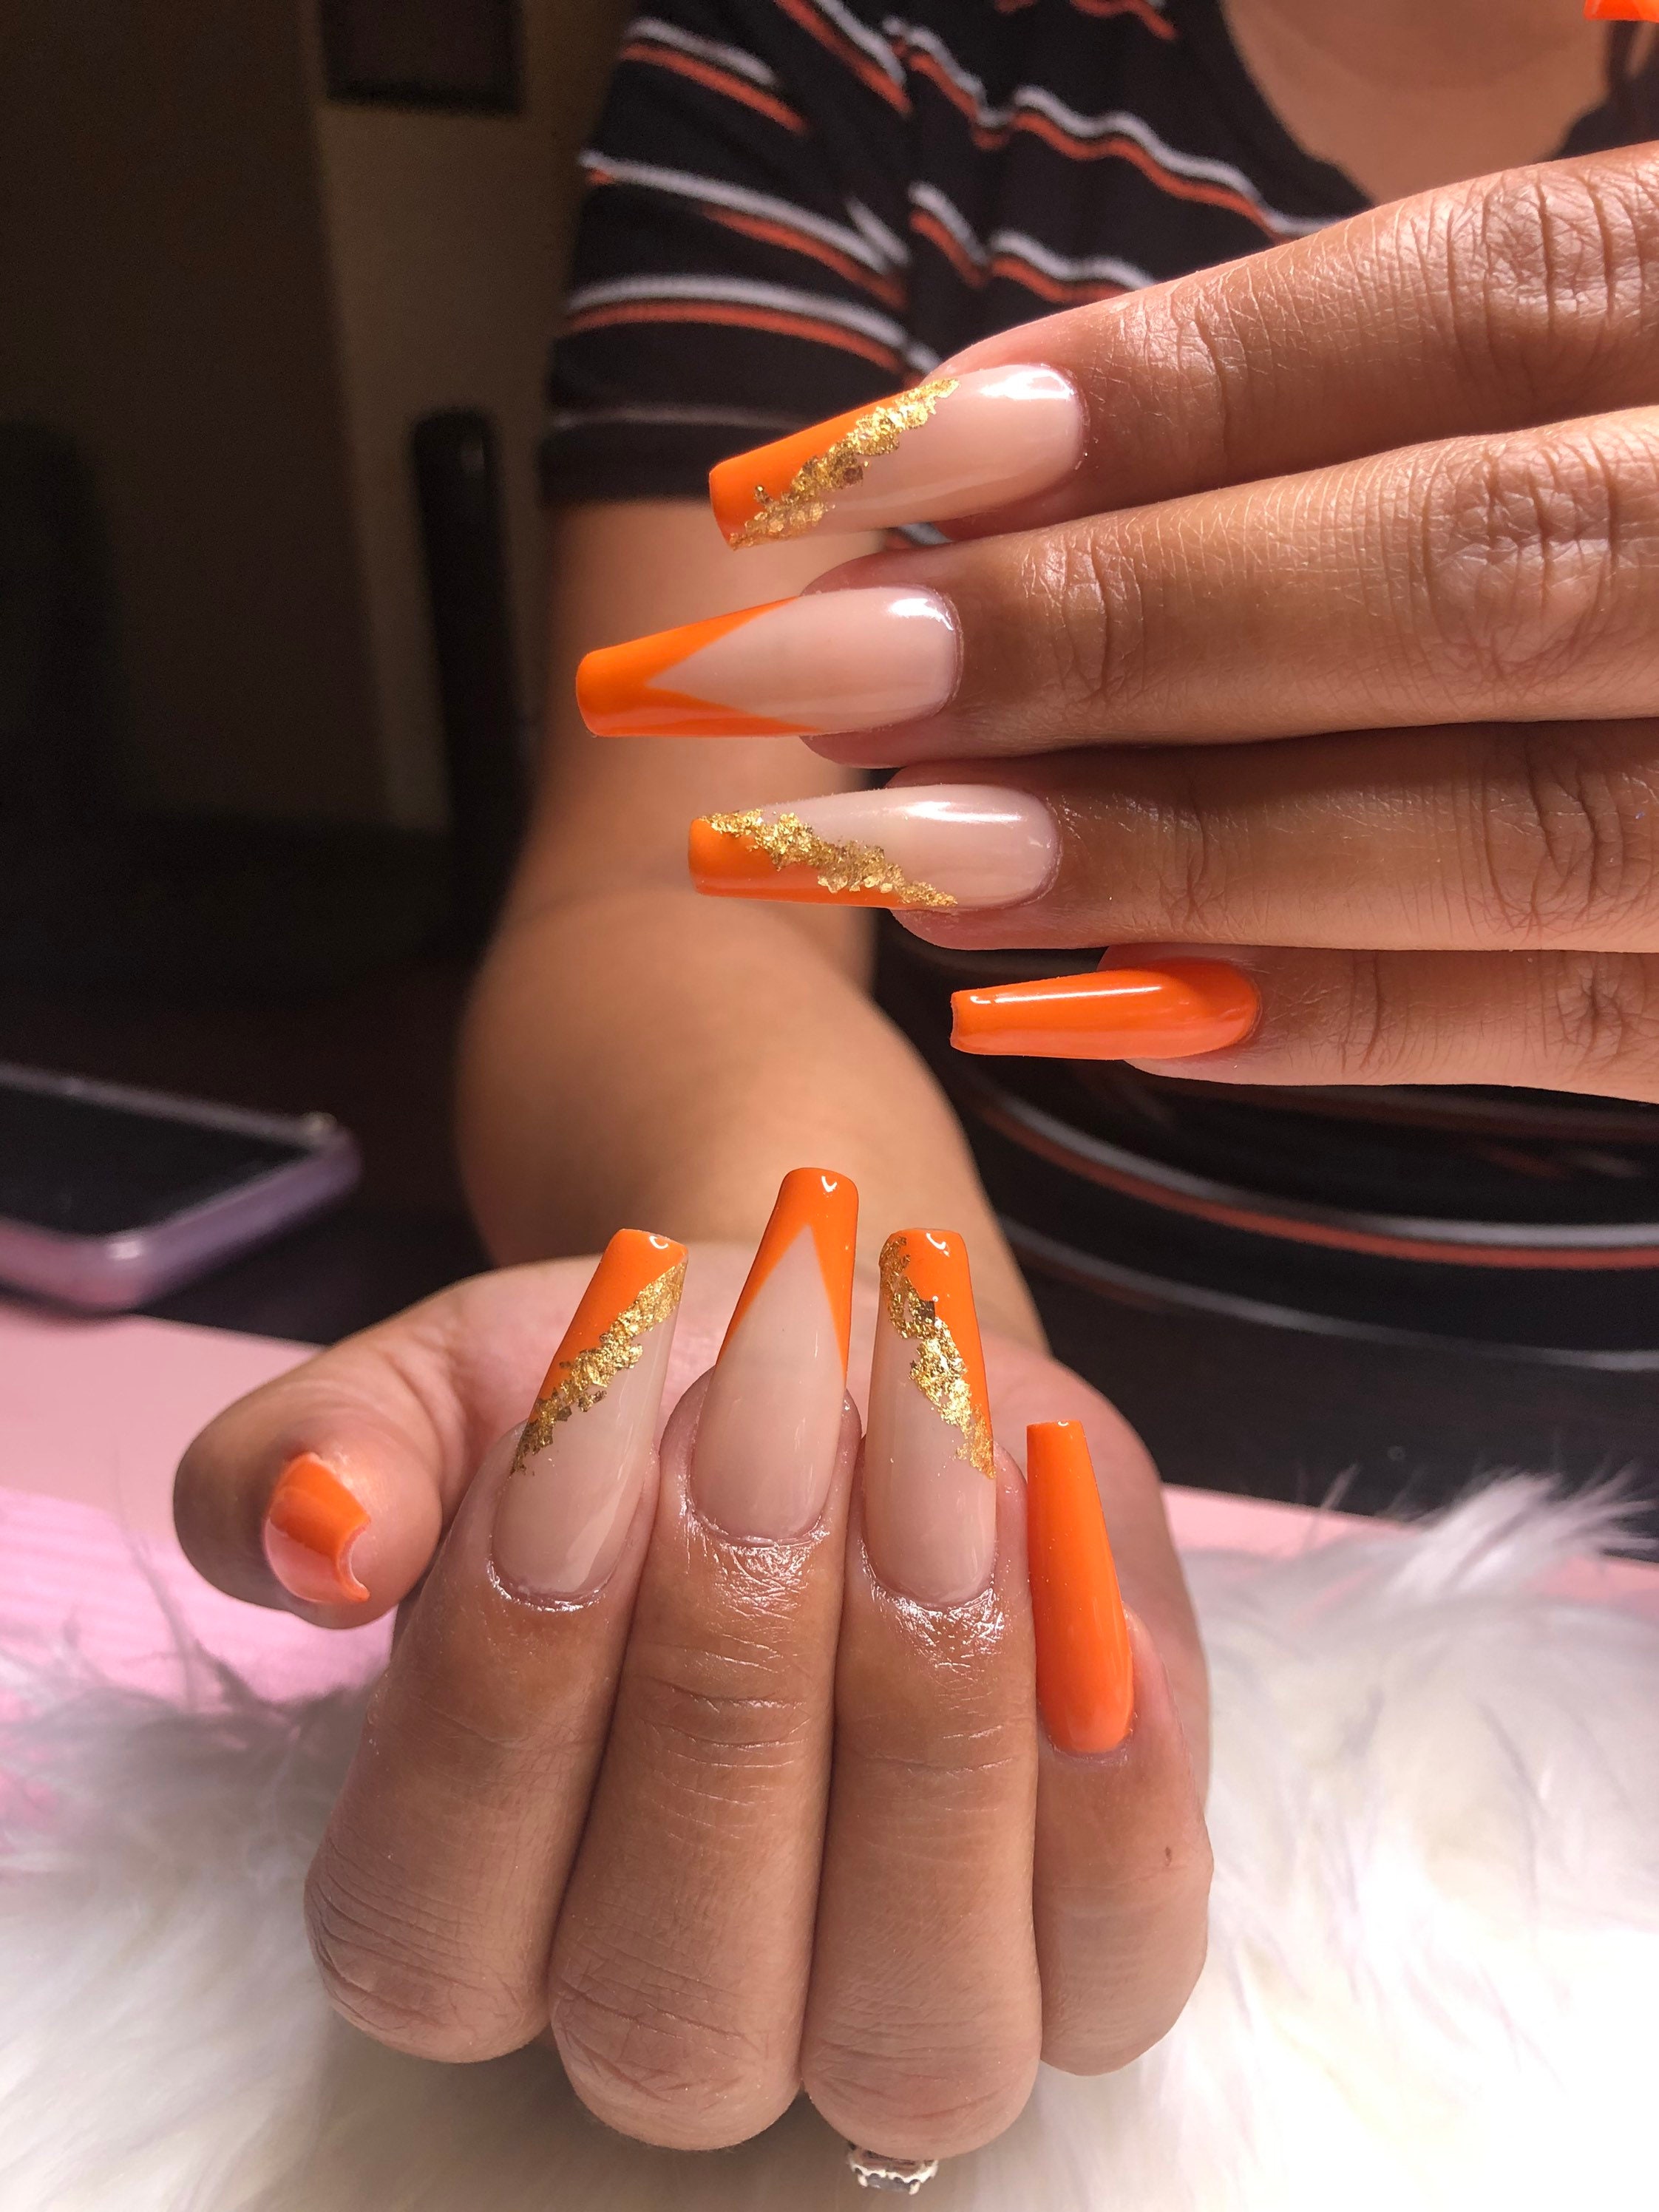 Blood Orange Nails Are The Must-Try Manicure Color For Tomato Girl Summer